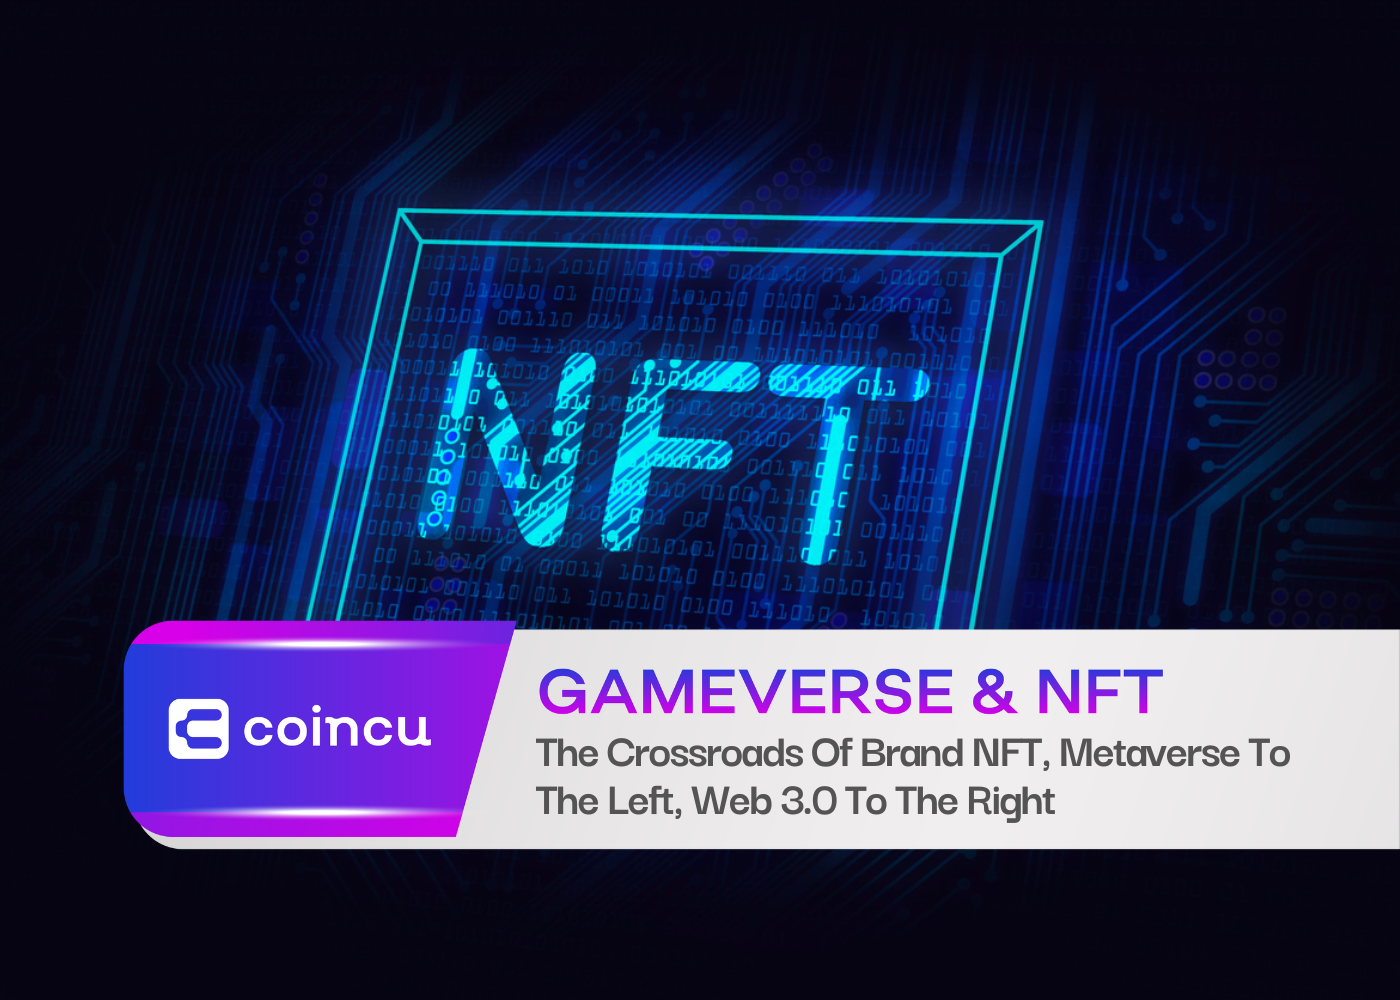 The Crossroads Of Brand NFT, Metaverse To The Left, Web 3.0 To The Right